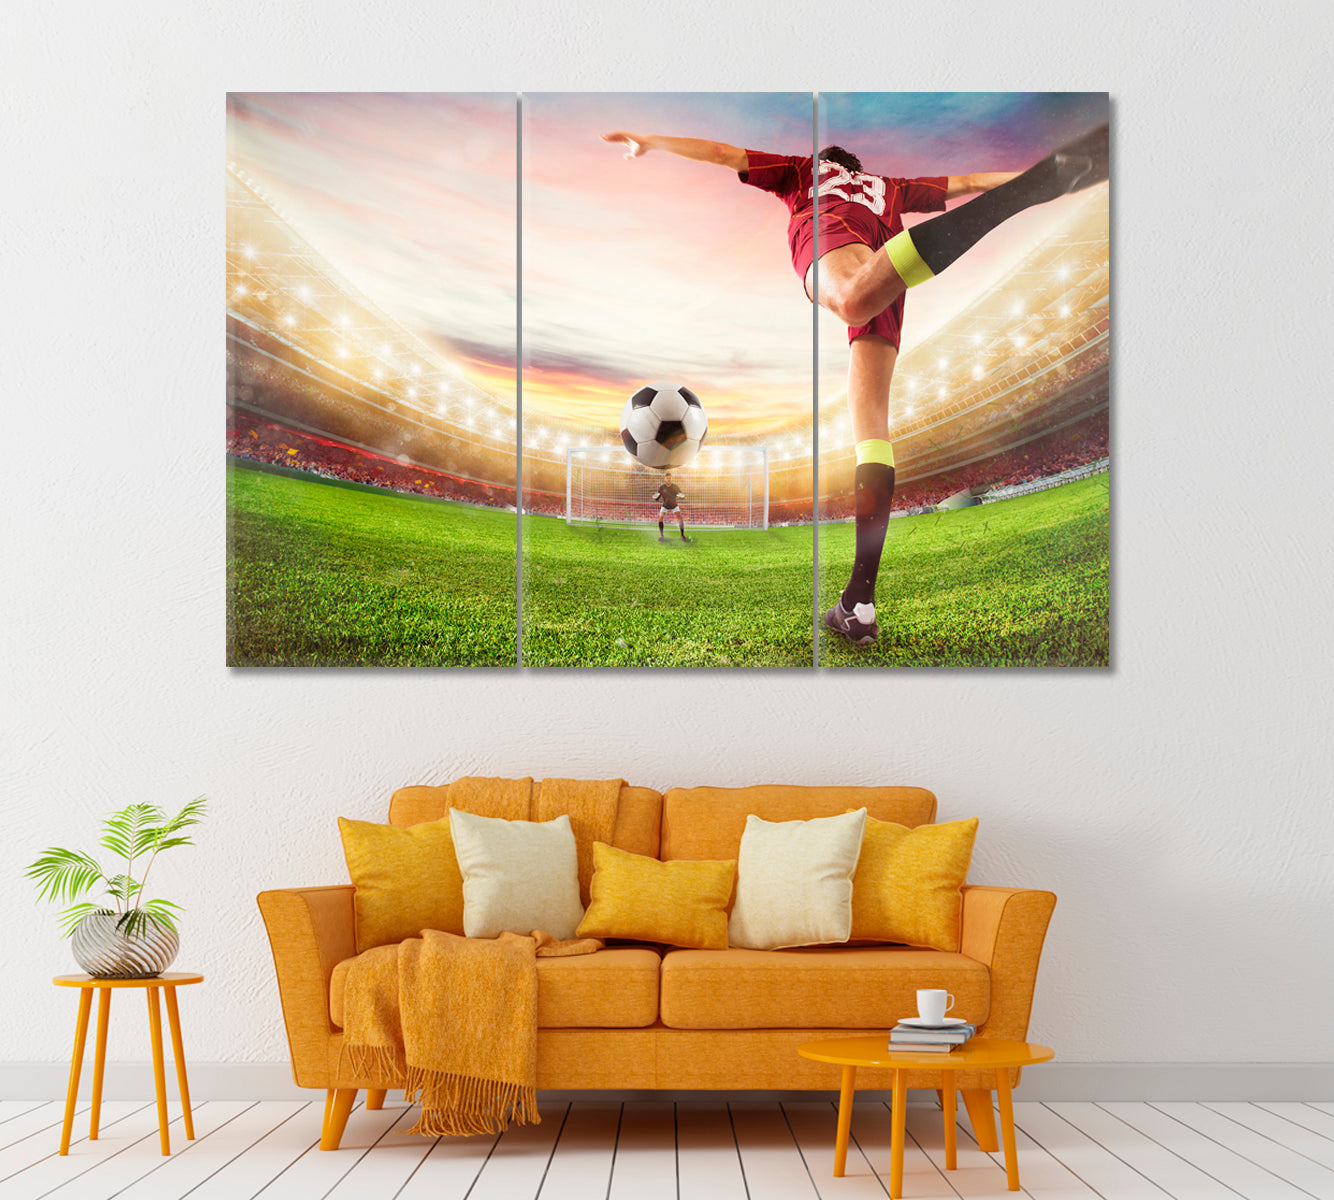 Soccer Striker in Action Canvas Print ArtLexy 3 Panels 36"x24" inches 